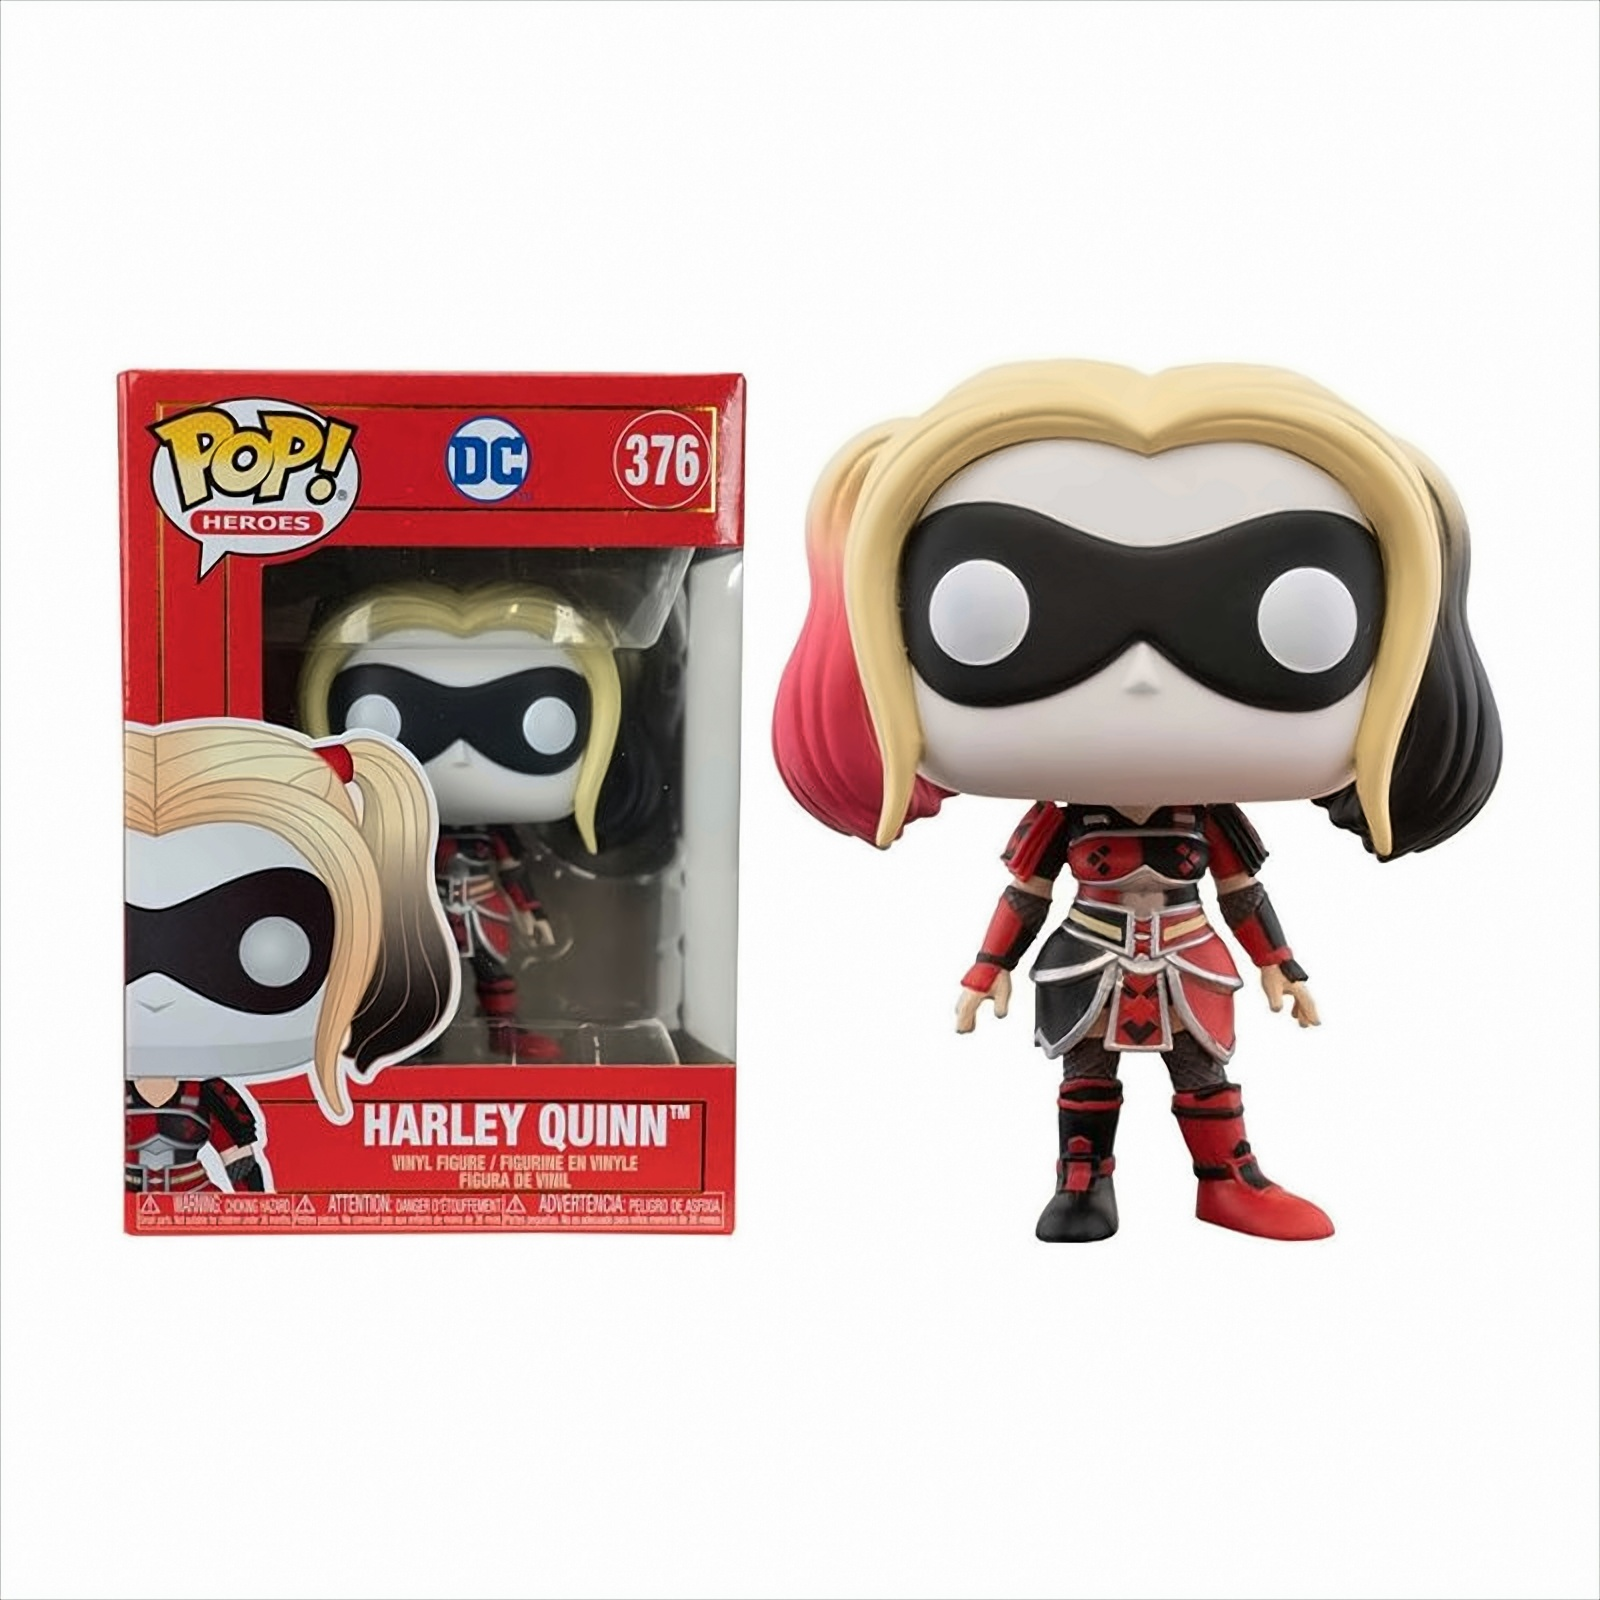 - Palace Quinn Imperial - Heroes POP DC Harley